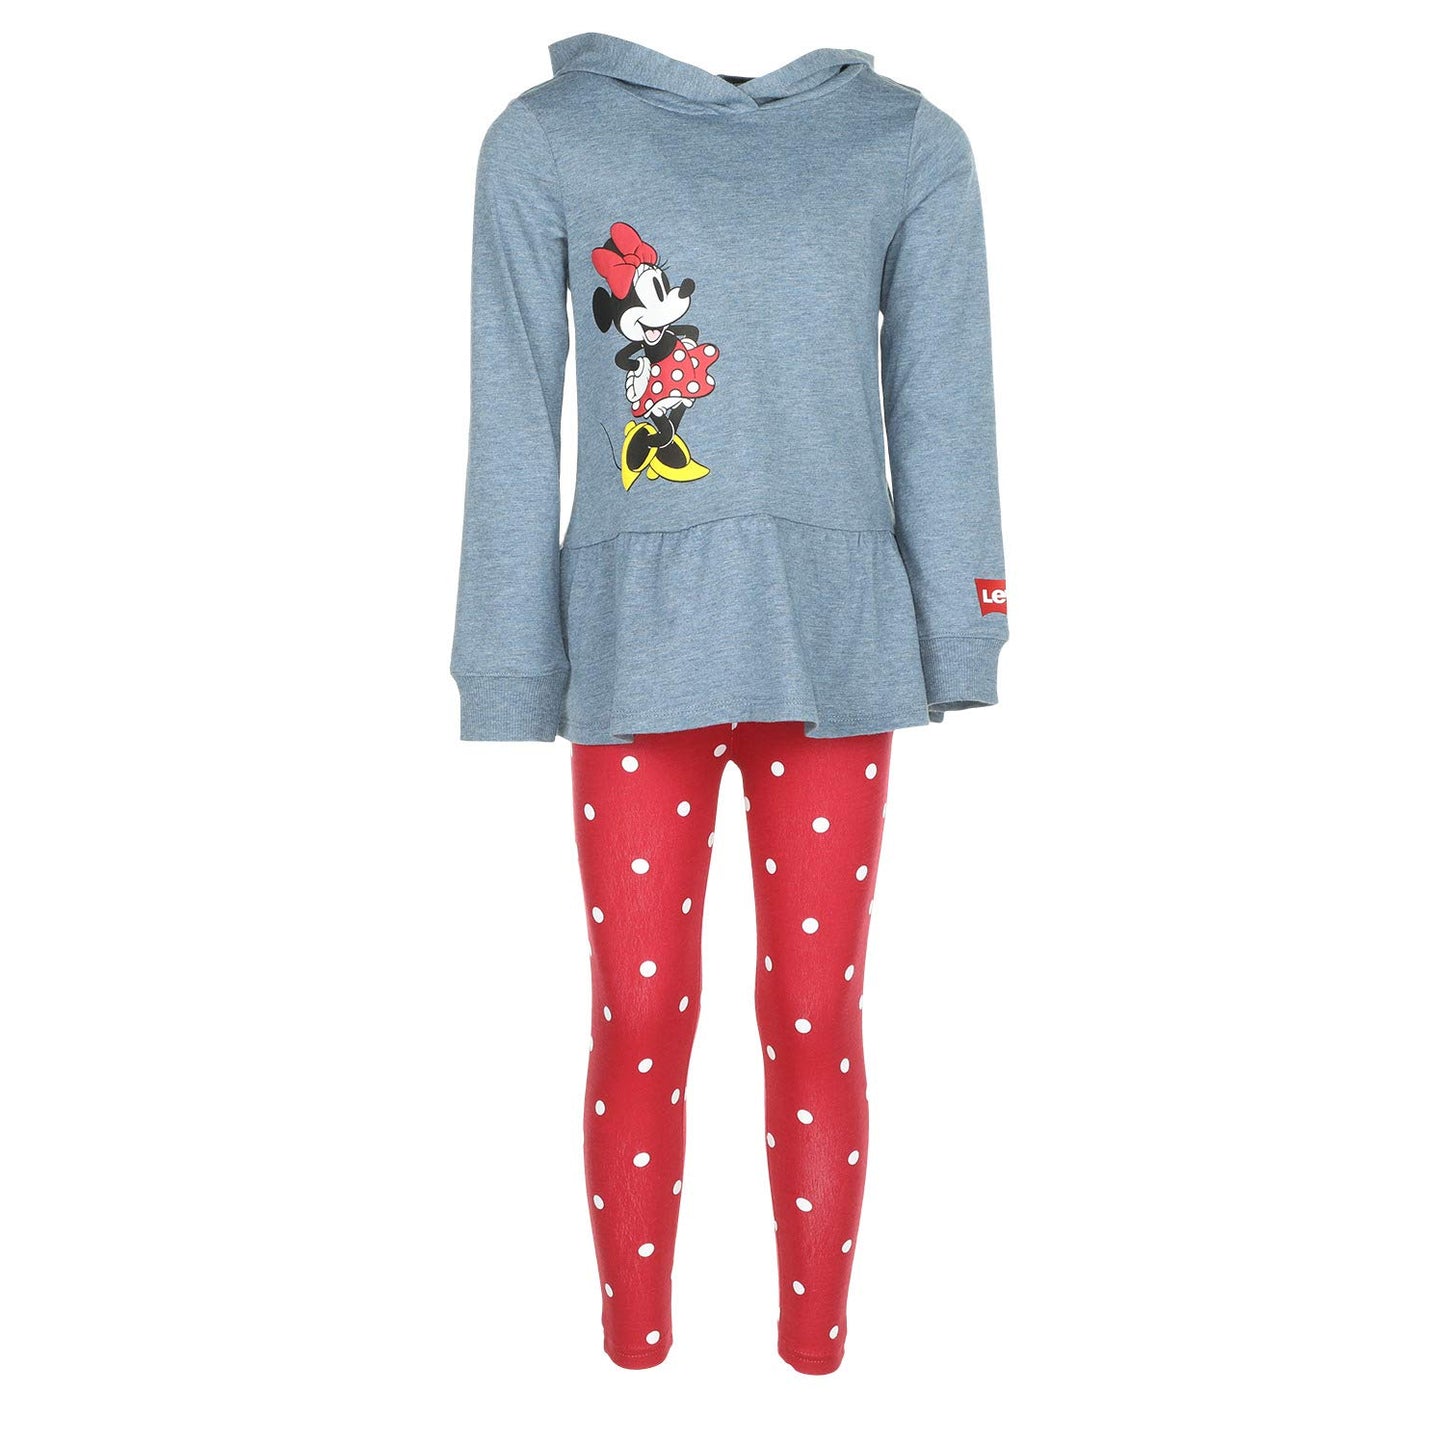 Image 1 of Levi's x Disney Minnie Mouse Hoodie and Leggings Set (Little Kids)